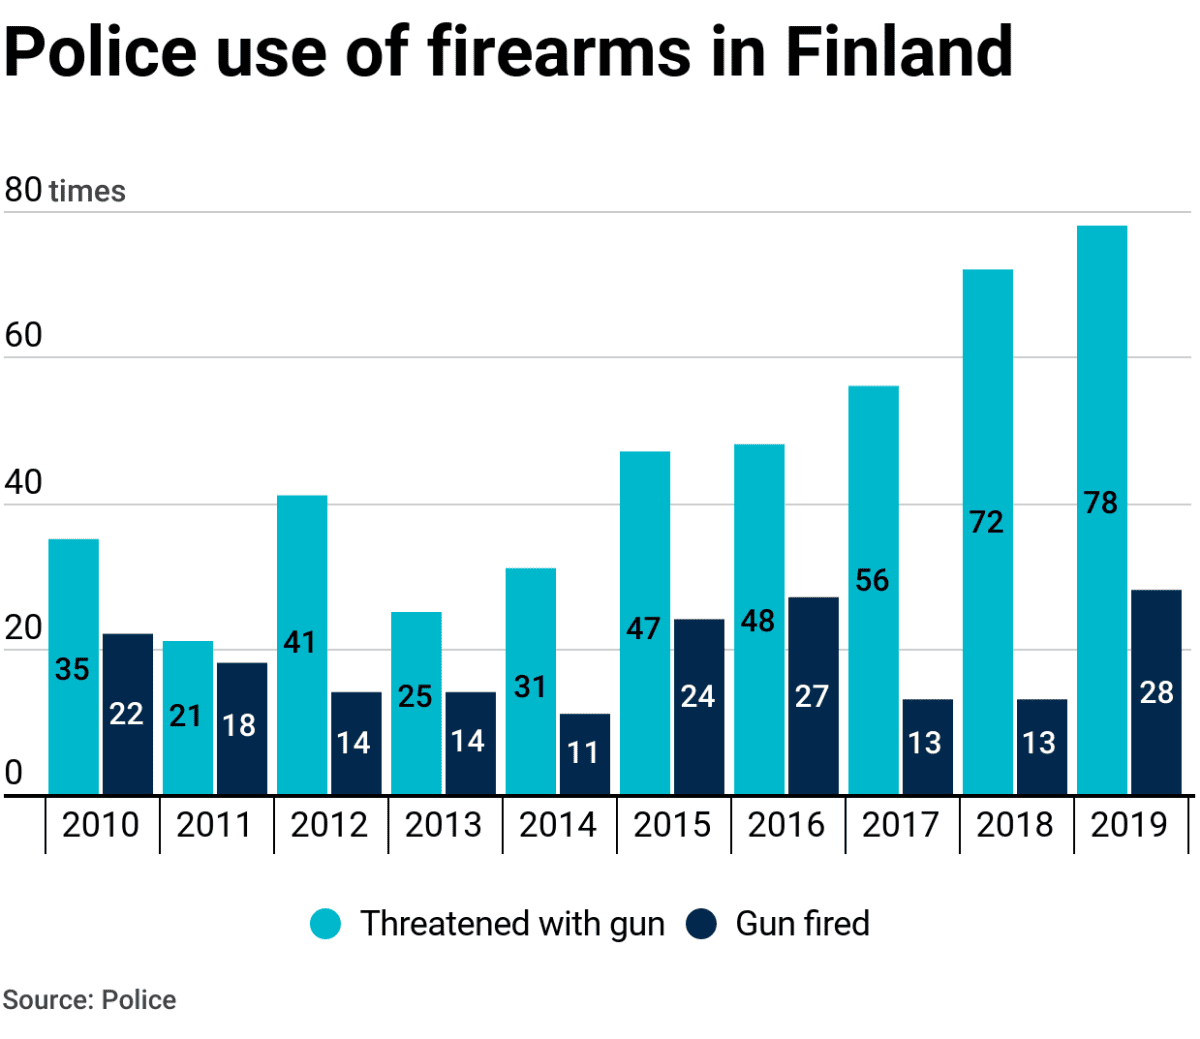 Police use of firearms in Finland.